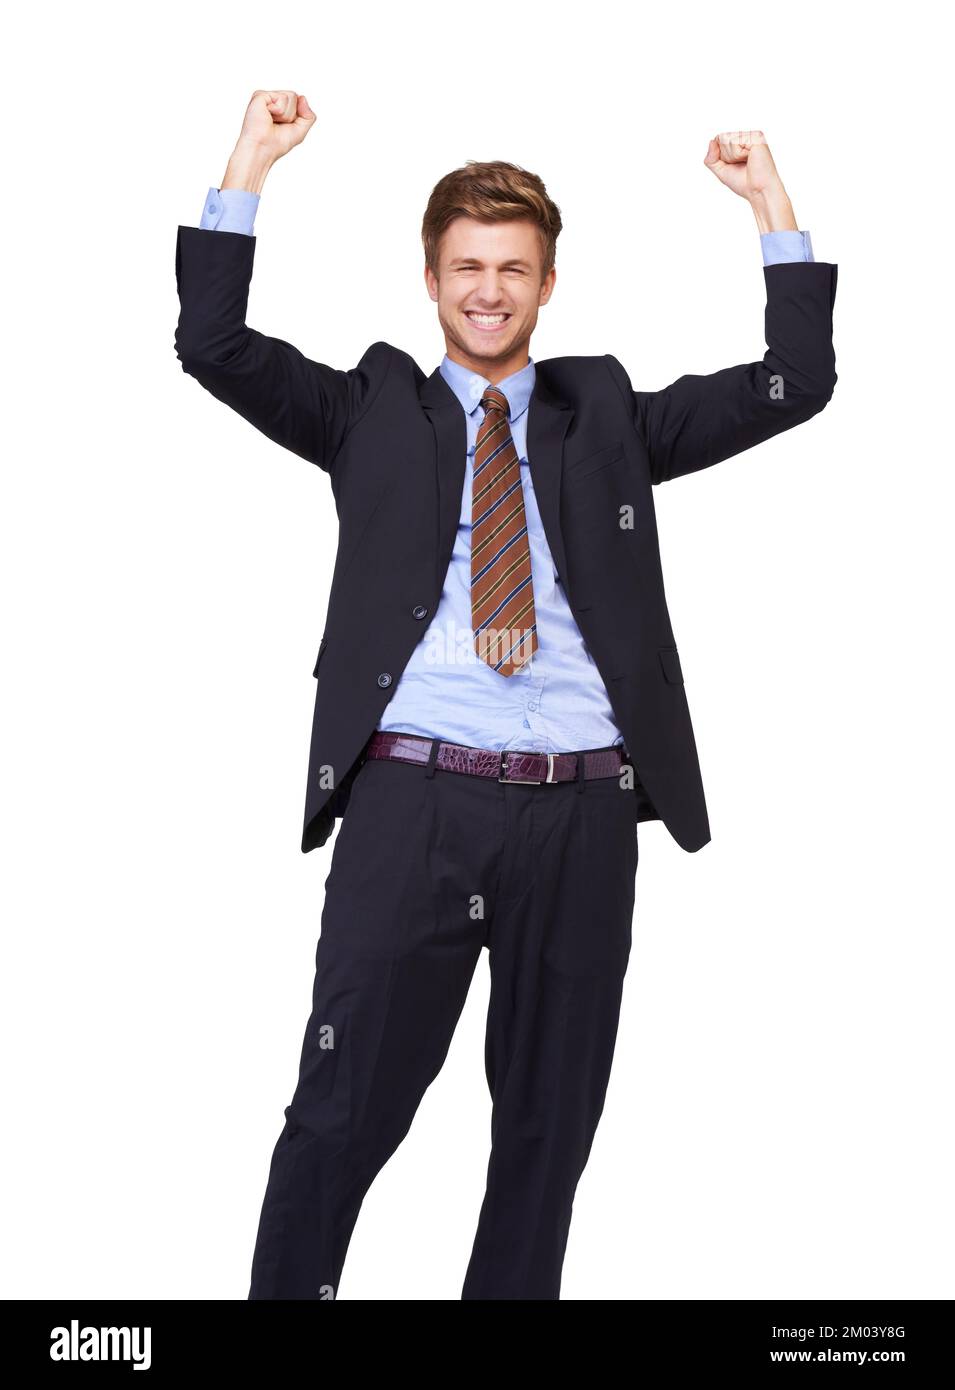 Success is my reward for hard work. Portrait of a handsome young business executive celebrating his success. Stock Photo